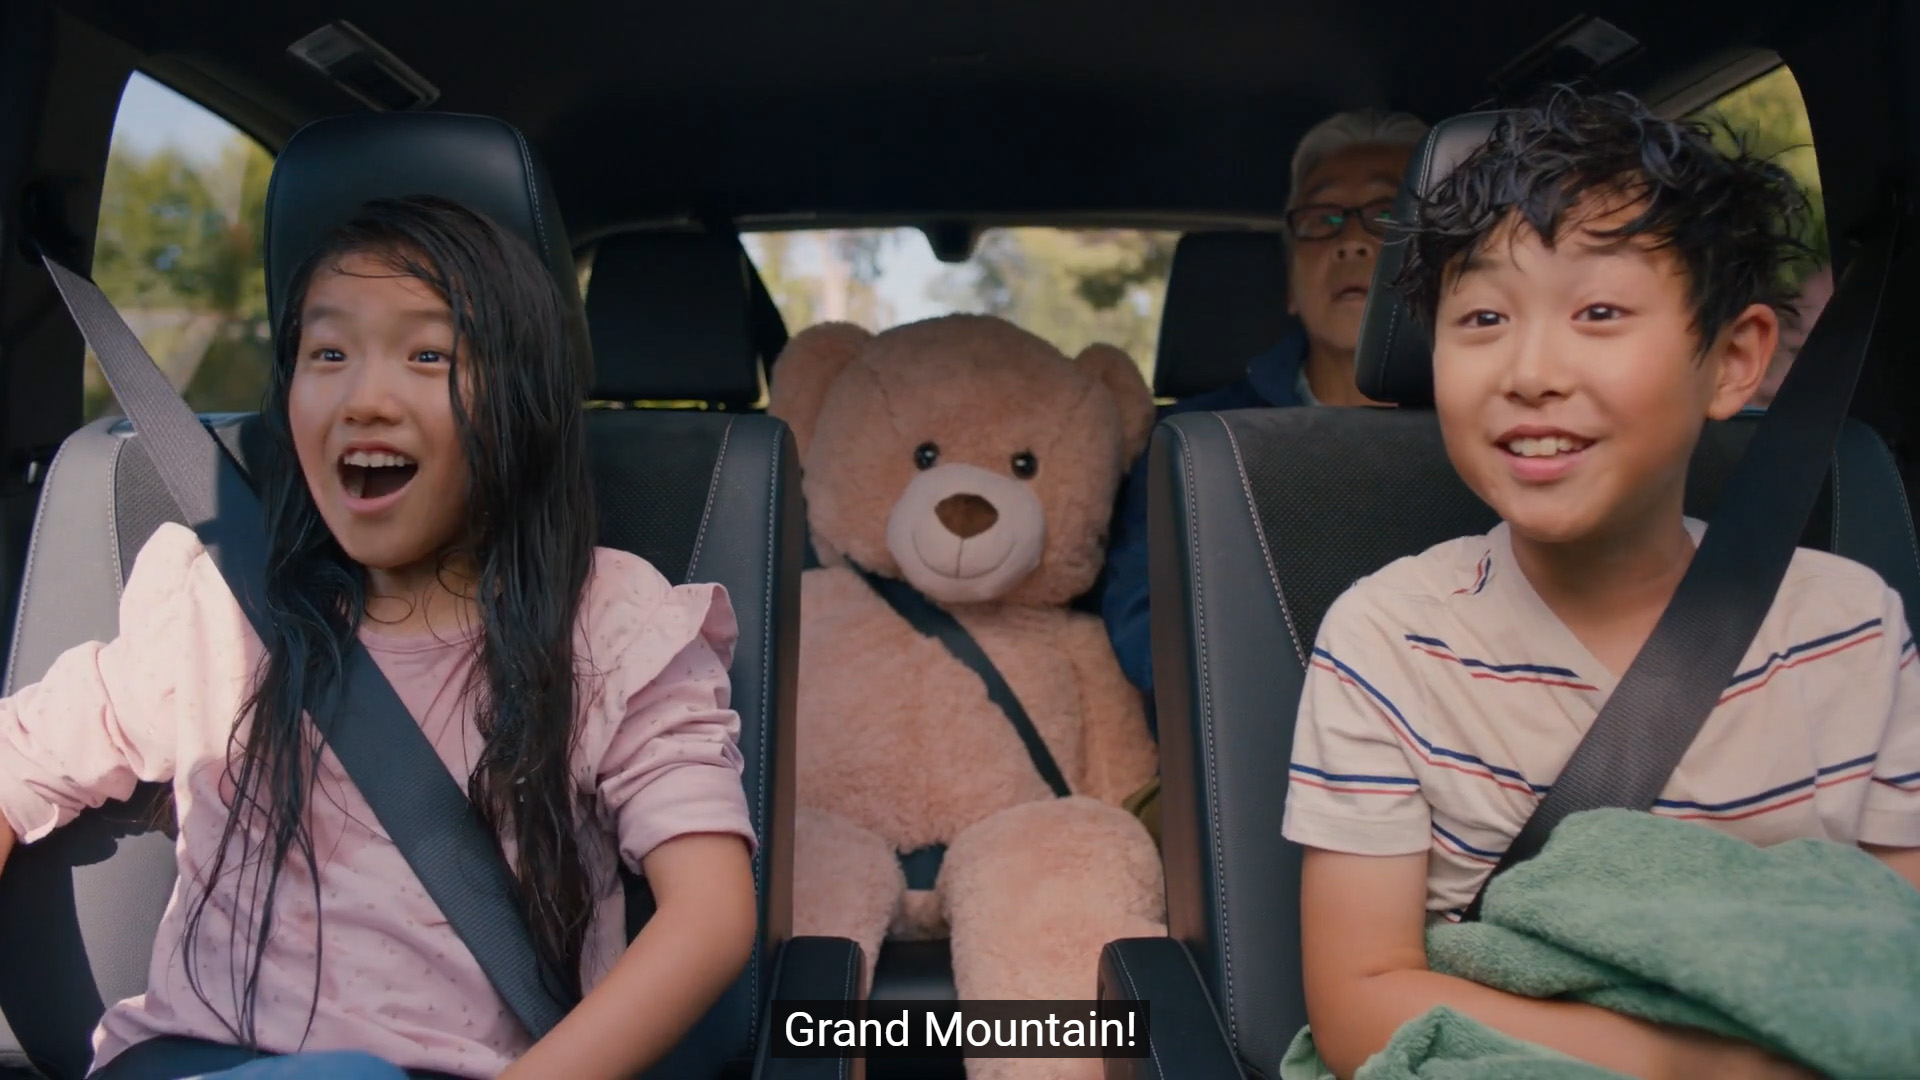 InterTrend Communications developed the spot “Yes Day” for Toyota’s first-ever 2024 Grand Highlander campaign.